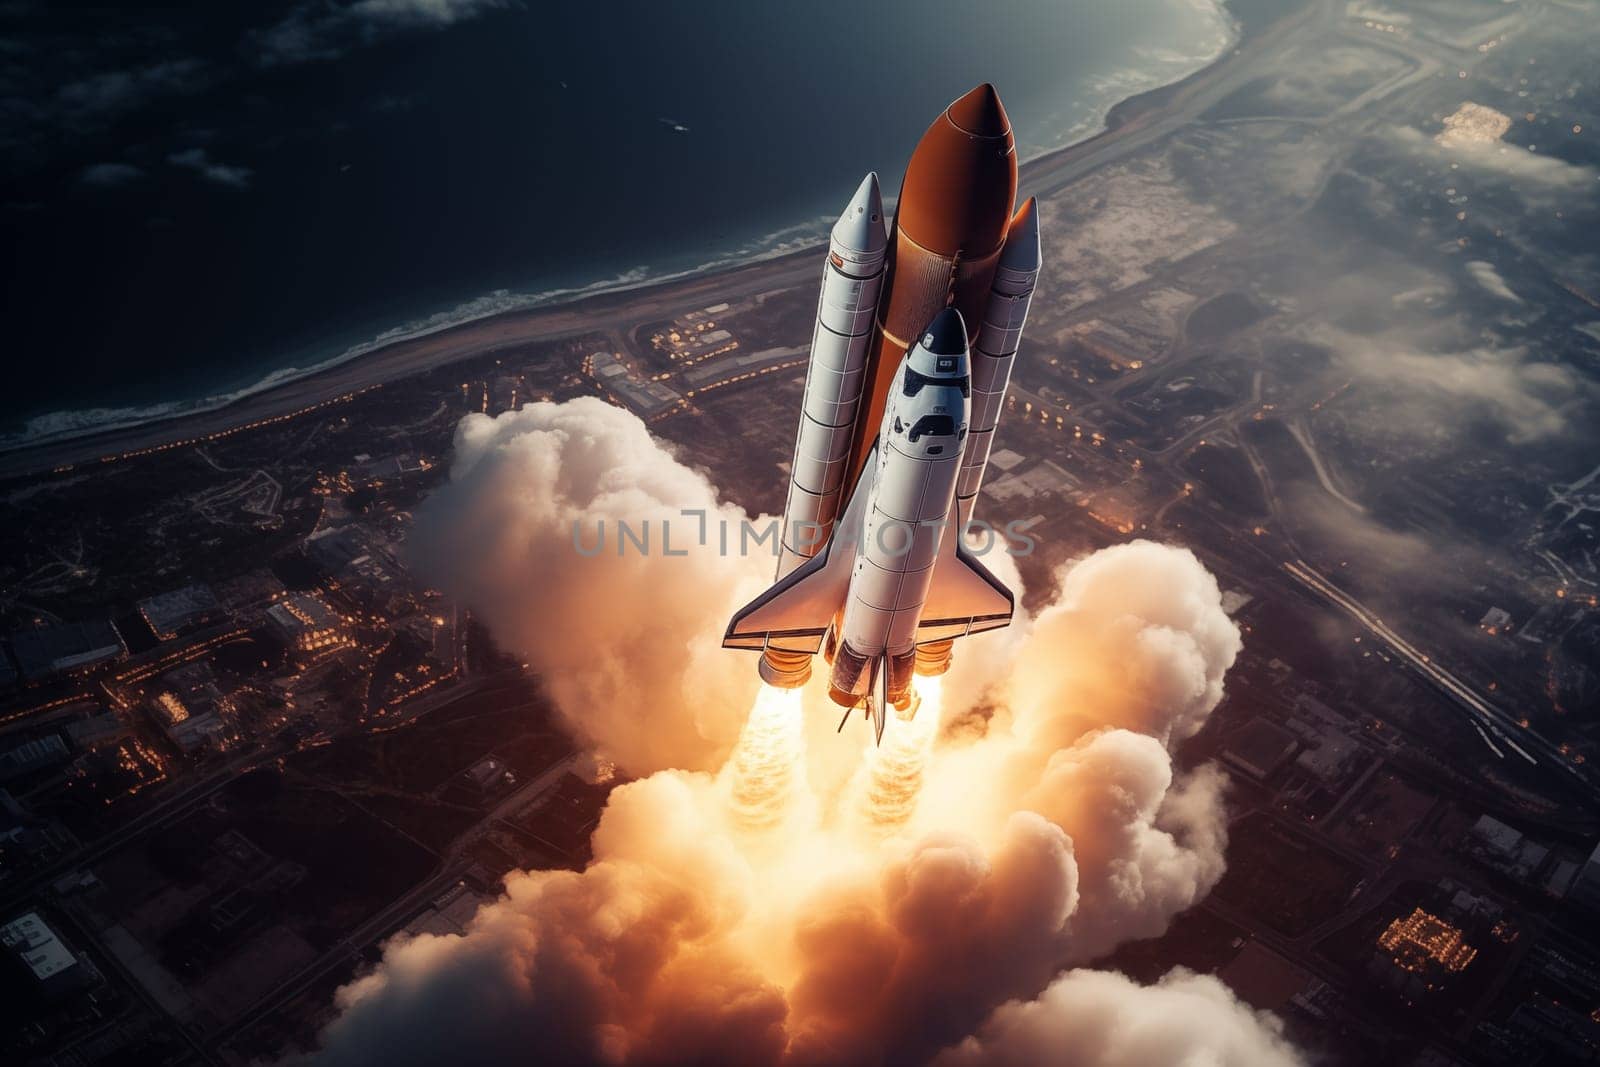 Aerial view of rocket launch at sunrise over ocean coast by dimol